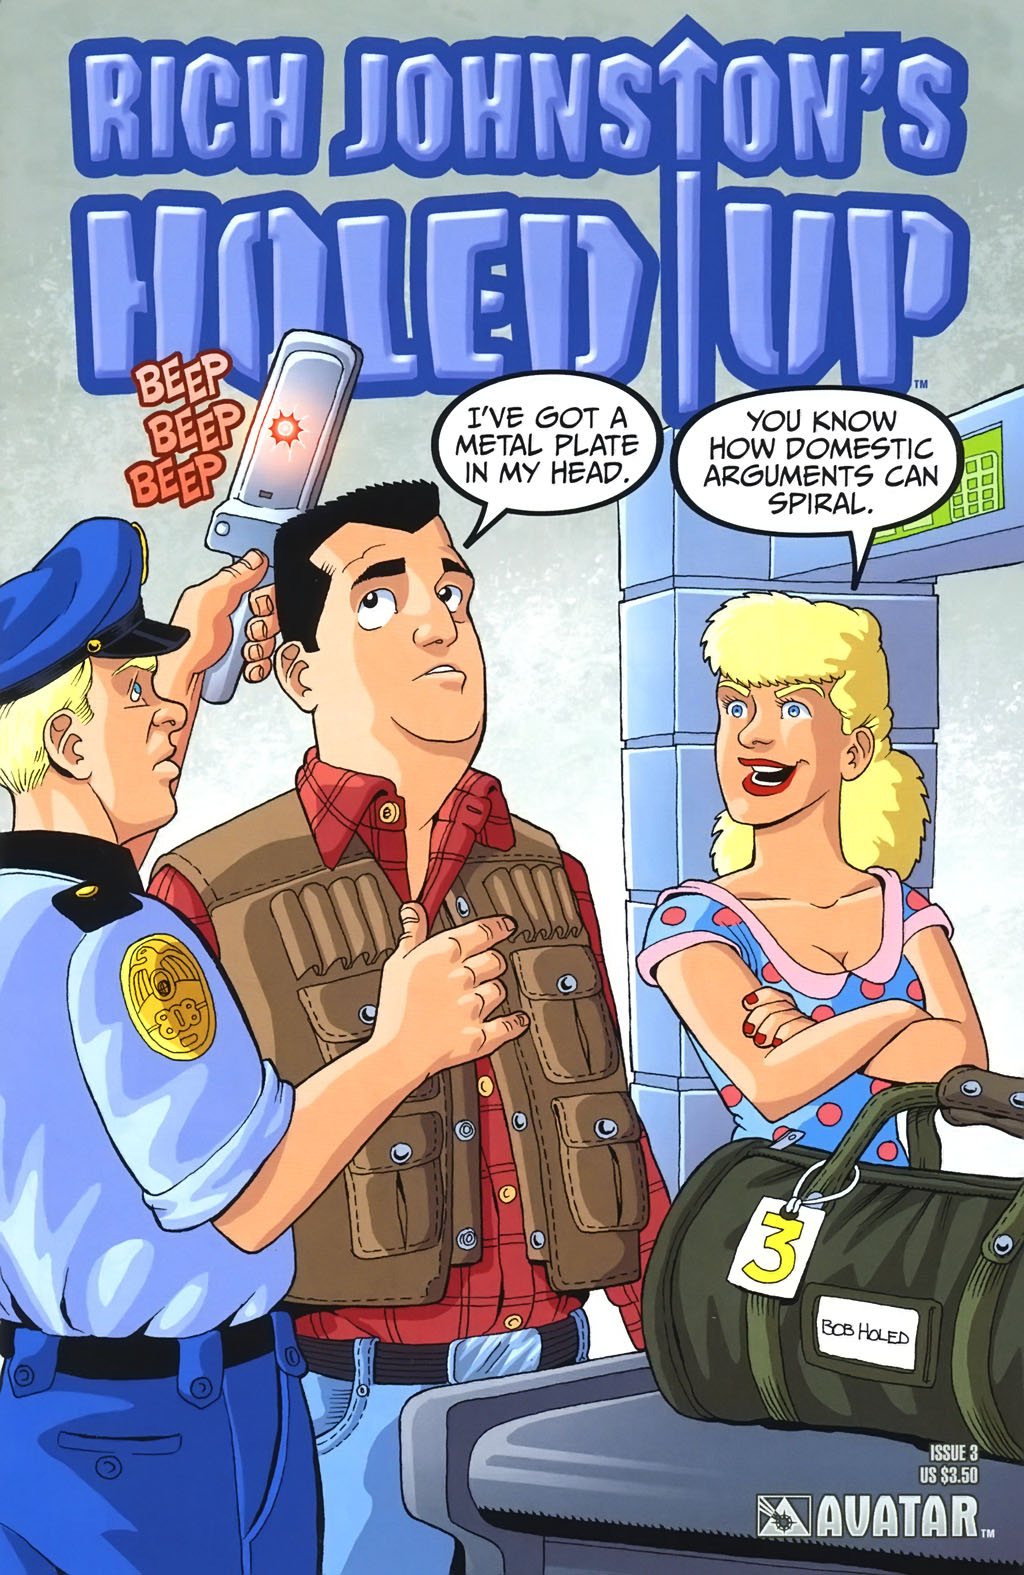 Read online Rich Johnston's Holed Up comic -  Issue #3 - 1